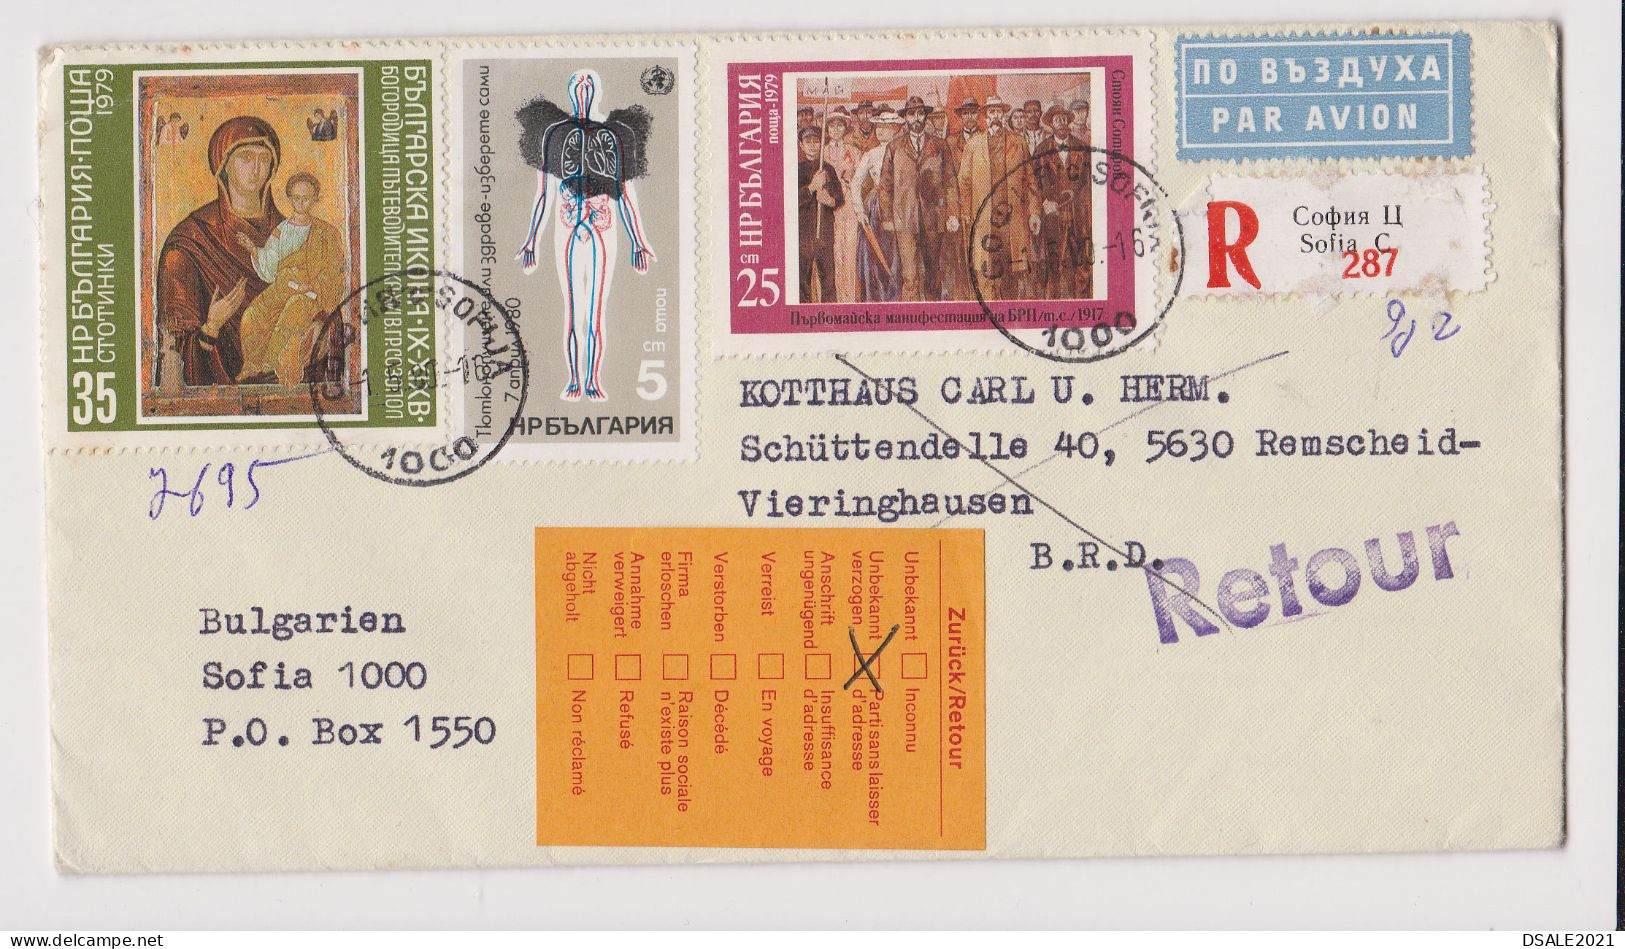 Bulgaria Bulgarien 1980 Registered Airmail Cover W/Colorful Topic Stamps Sent To Germany BRD, Return To Sender (66311) - Lettres & Documents